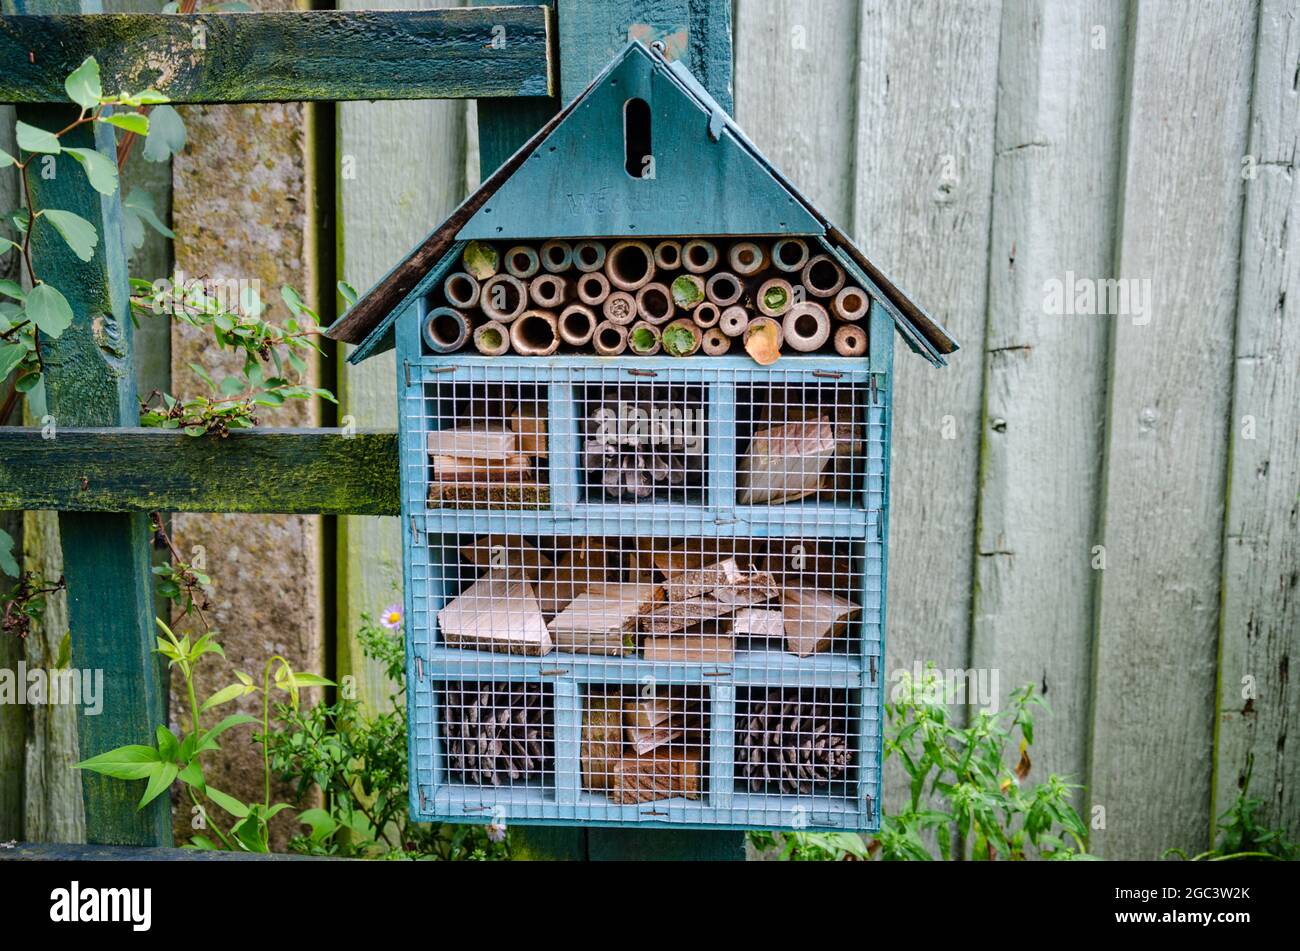 A bee or insect hotel attached to a post in a garden to provide insects with a safe place to hibernate. Stock Photo